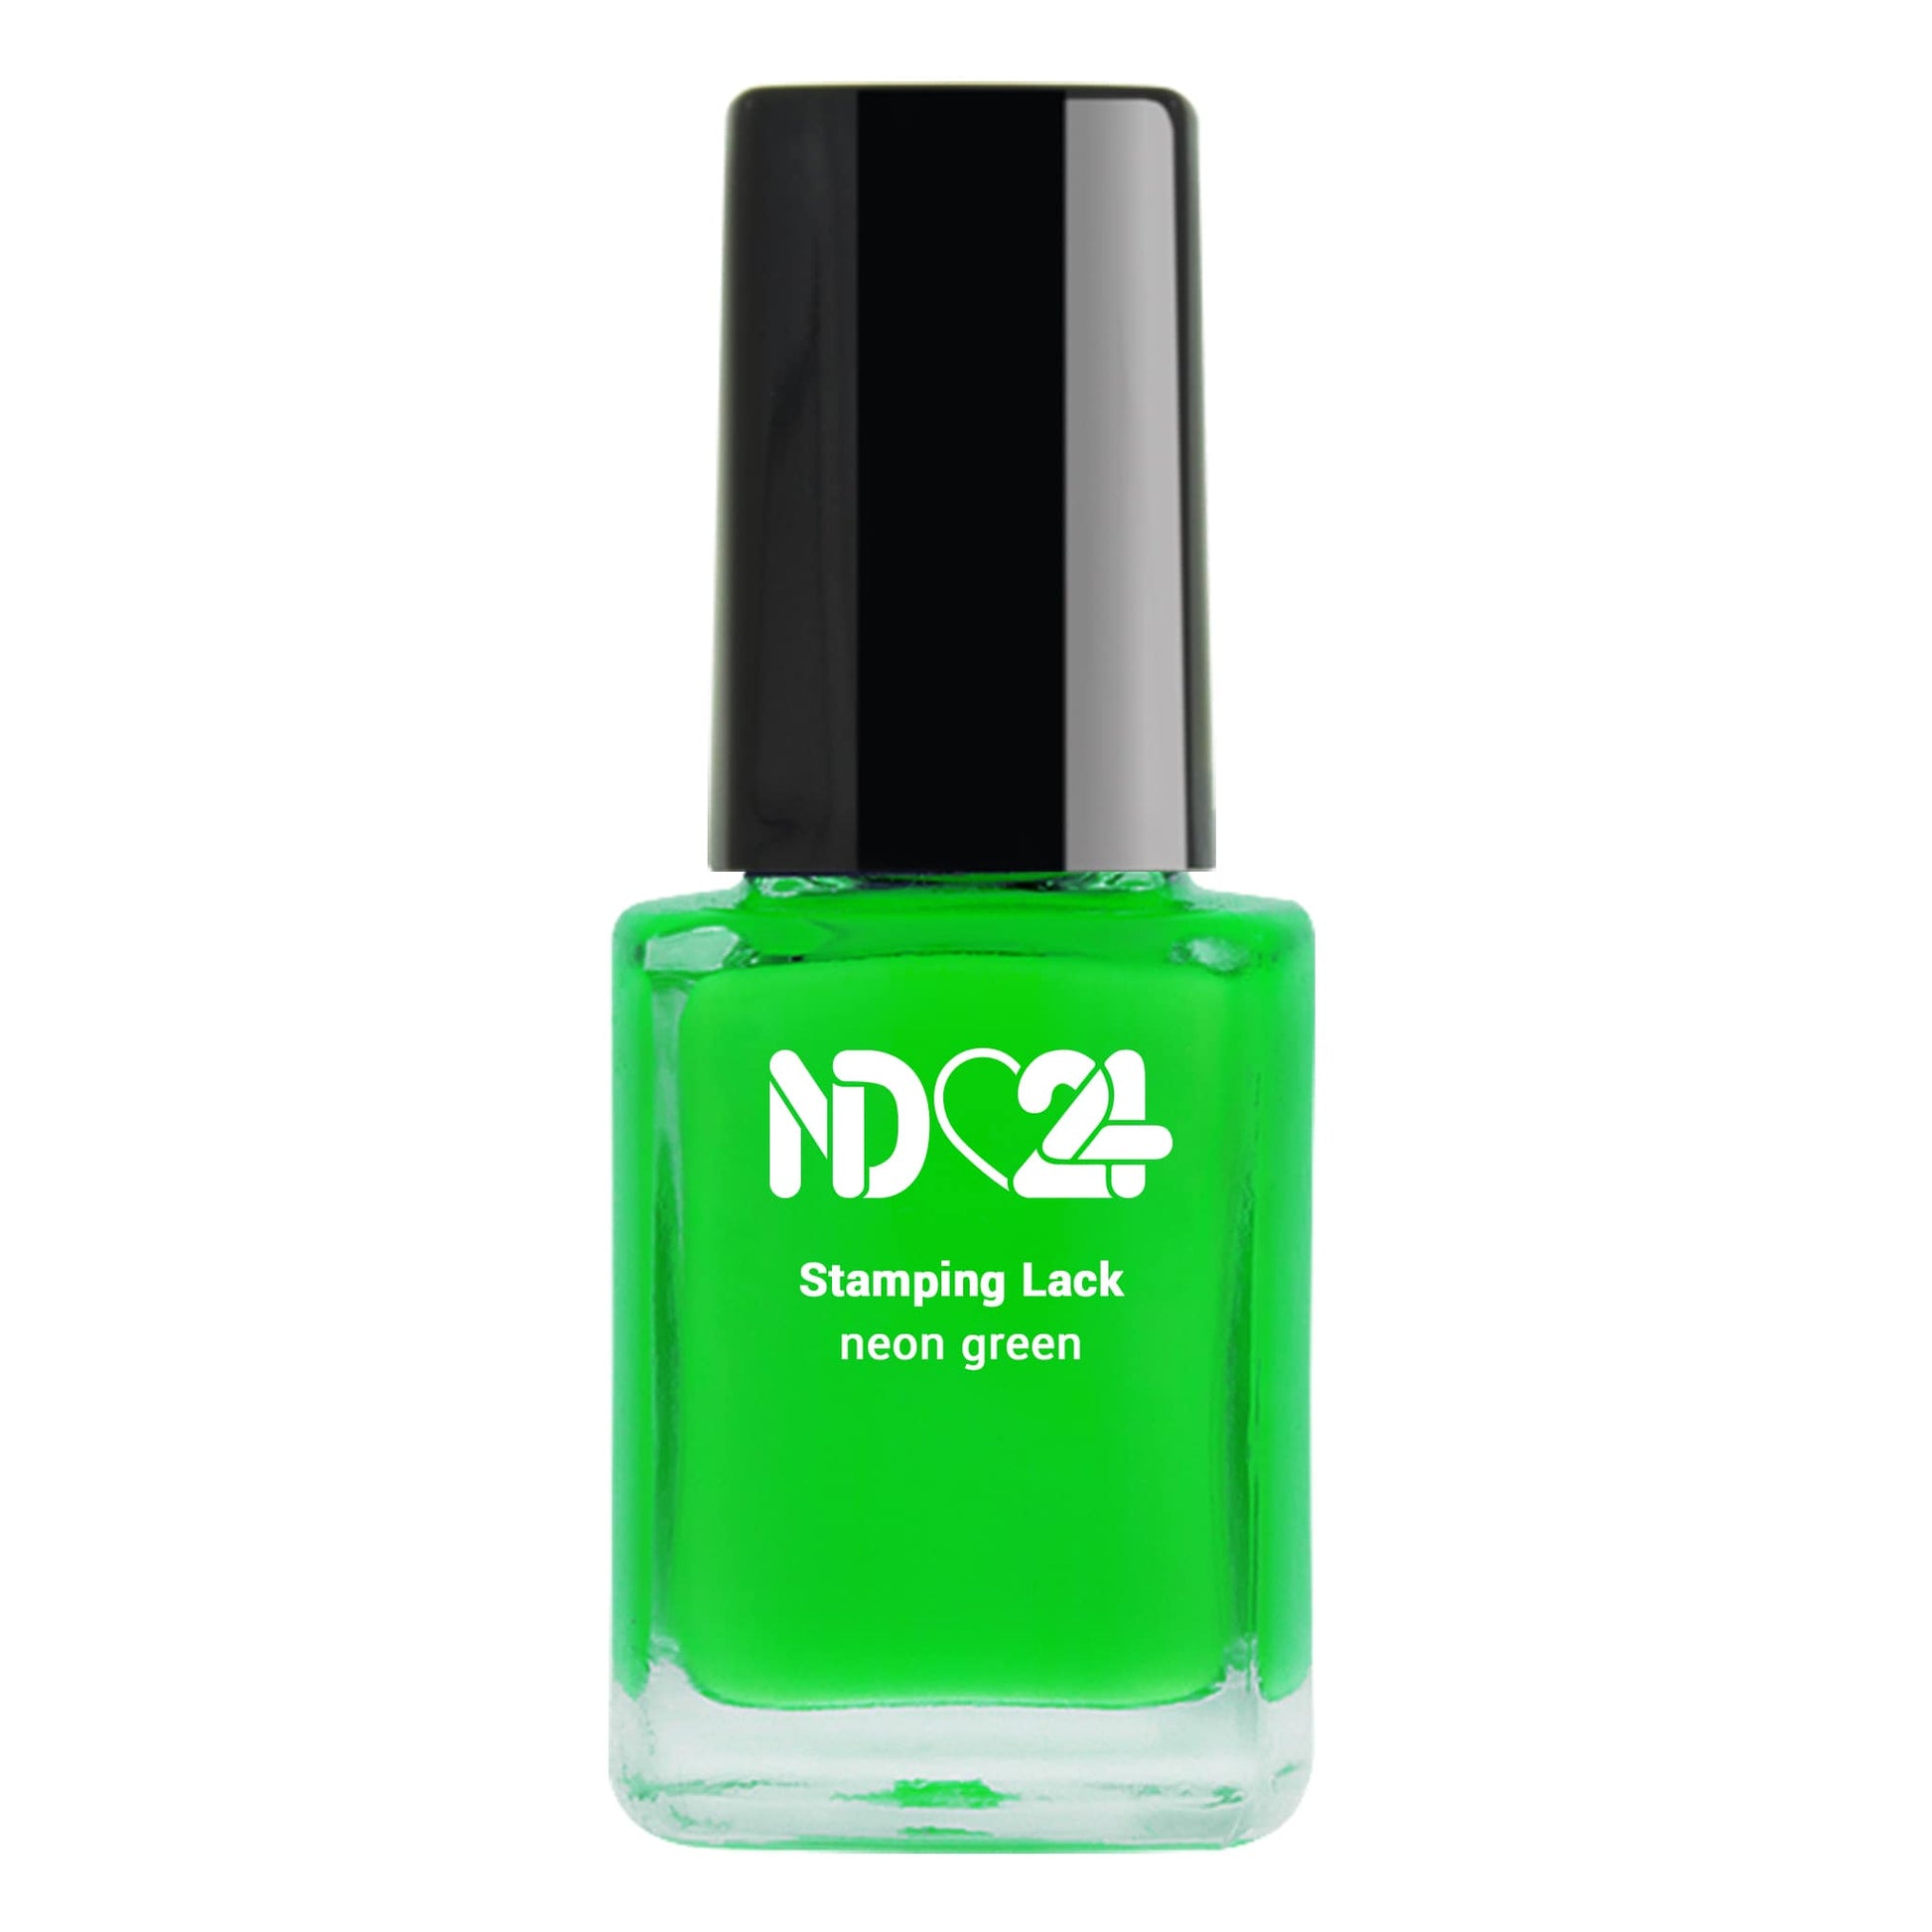 Stamping Lack neon green